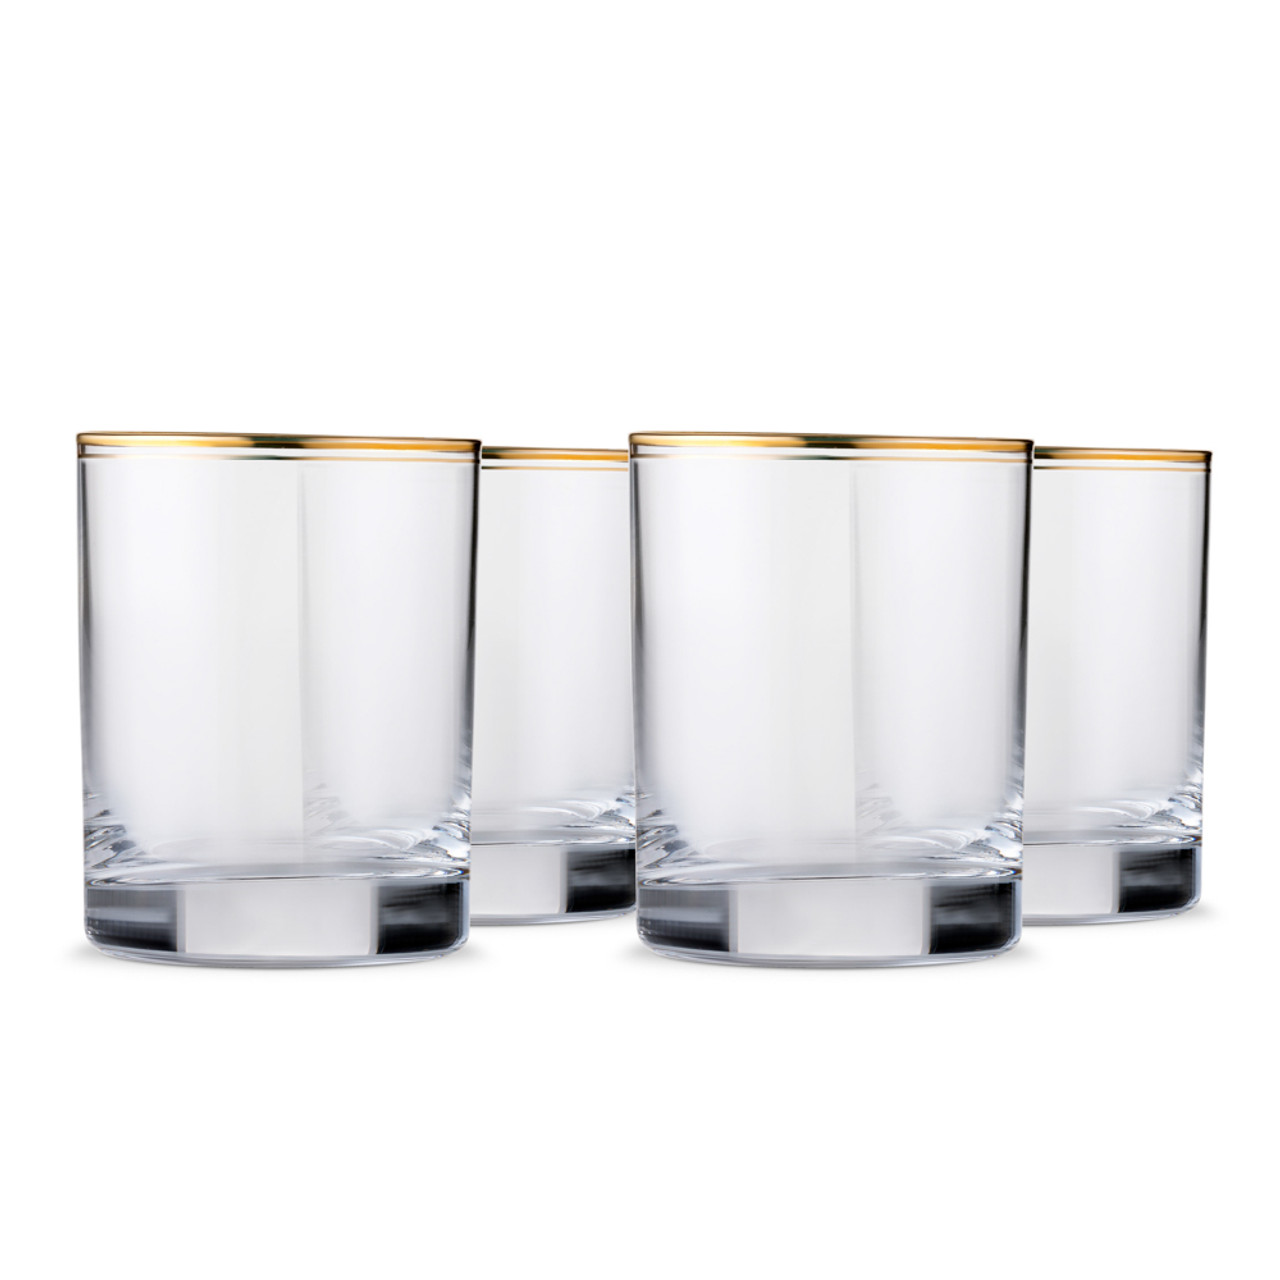 https://cdn11.bigcommerce.com/s-cznxq08r7/images/stencil/1280x1280/products/5346/14545/SMG000030_Gold_Band_Whiskey_Rocks_Glasses_-_11.75_oz_-_Set_of_4_01__80407.1654176088.jpg?c=1